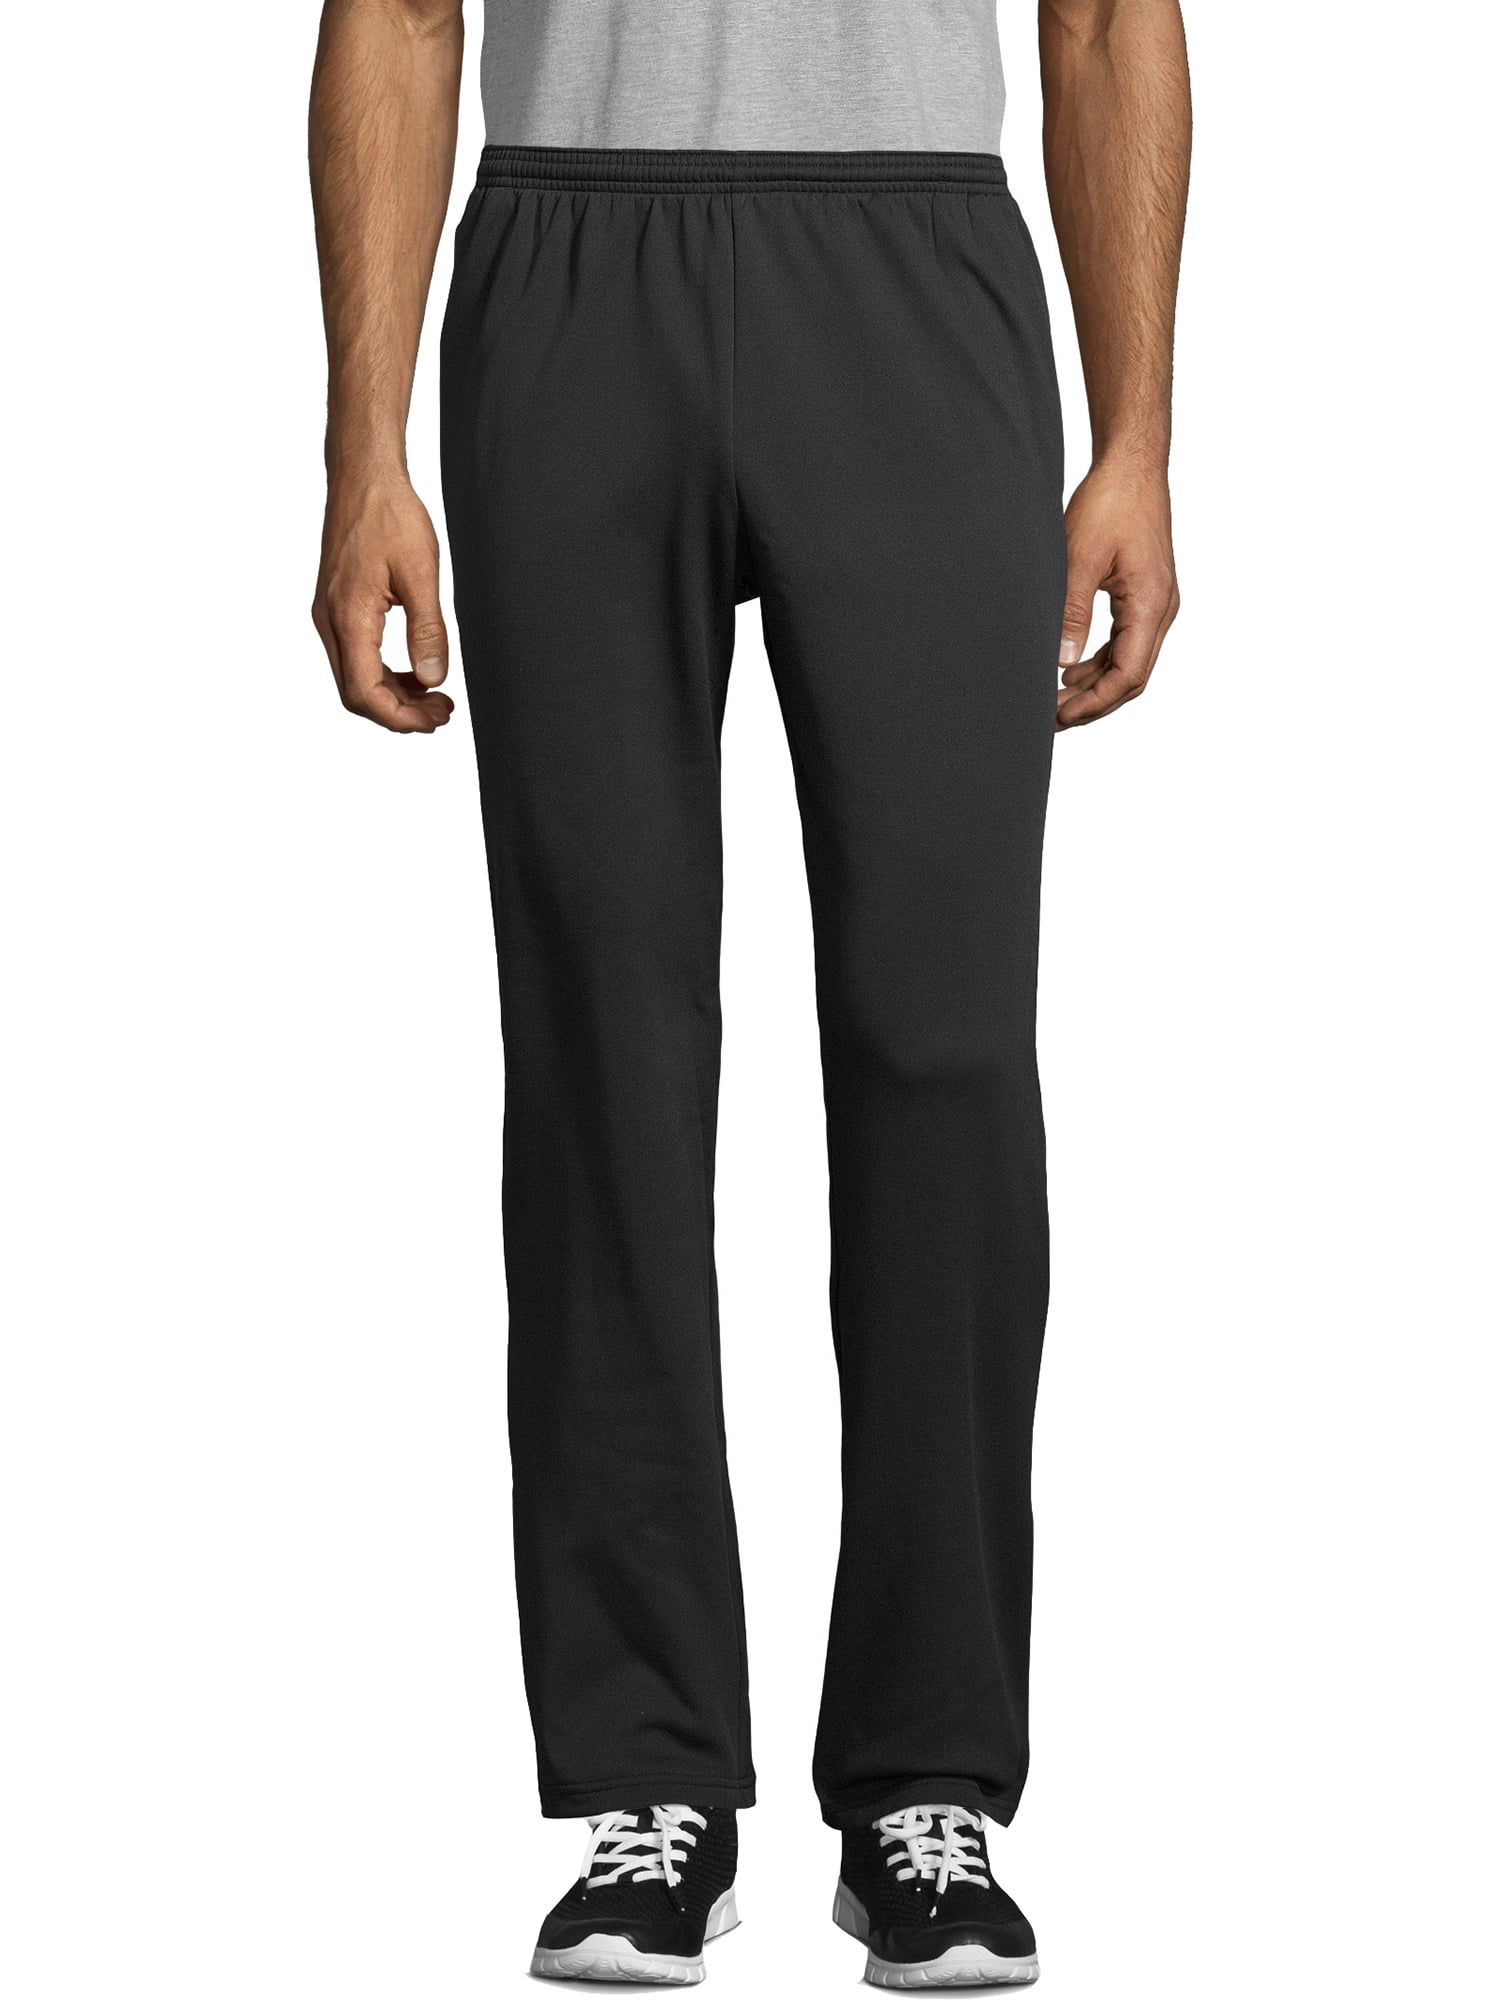 Hanes Sport Men's and Big Men's Performance Sweatpants with Pockets, Up ...